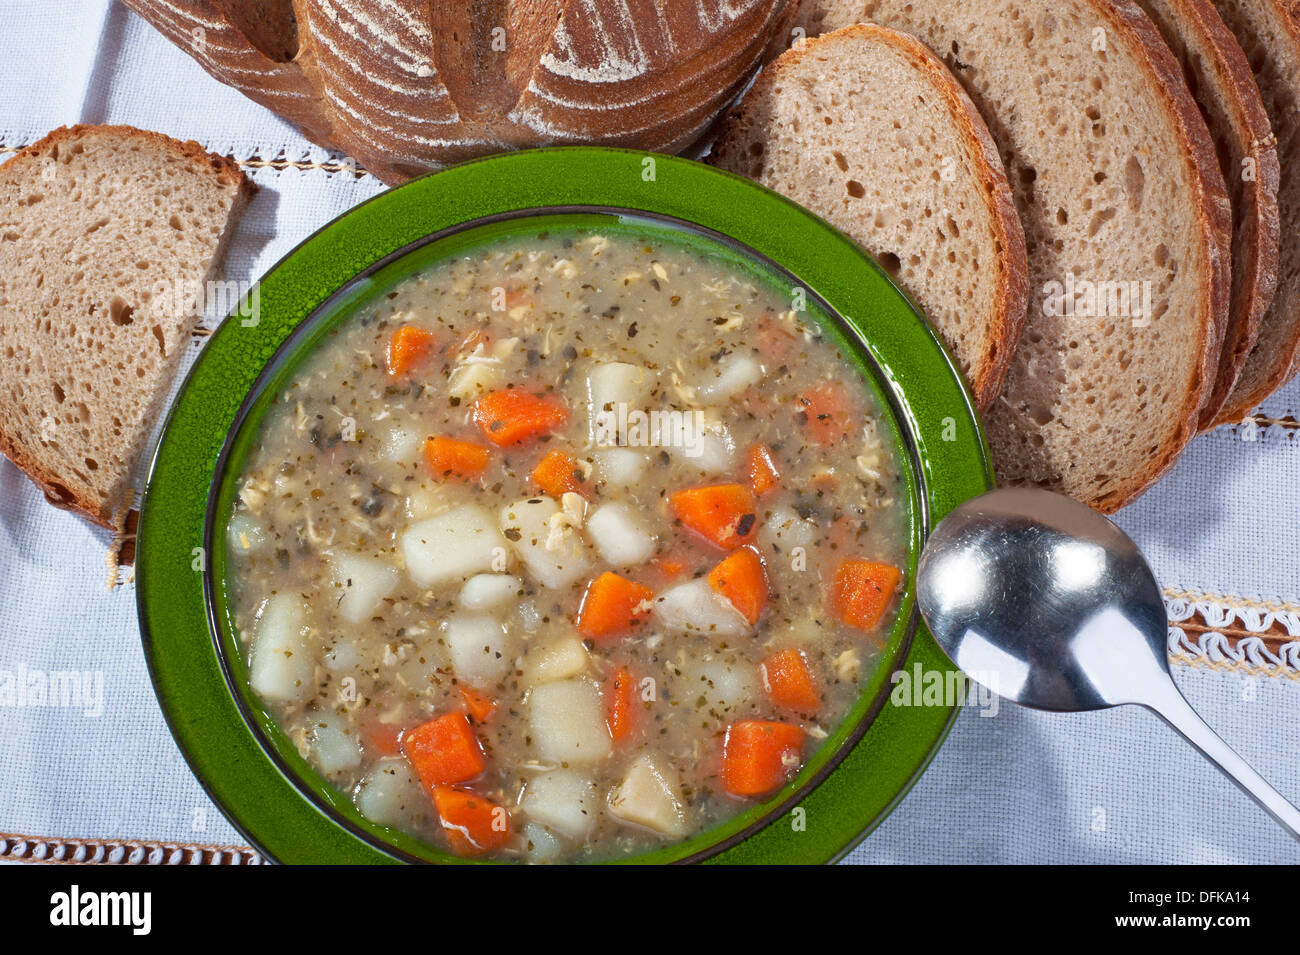 Soup - homemade potato soup with carrot and bread Stock Photo